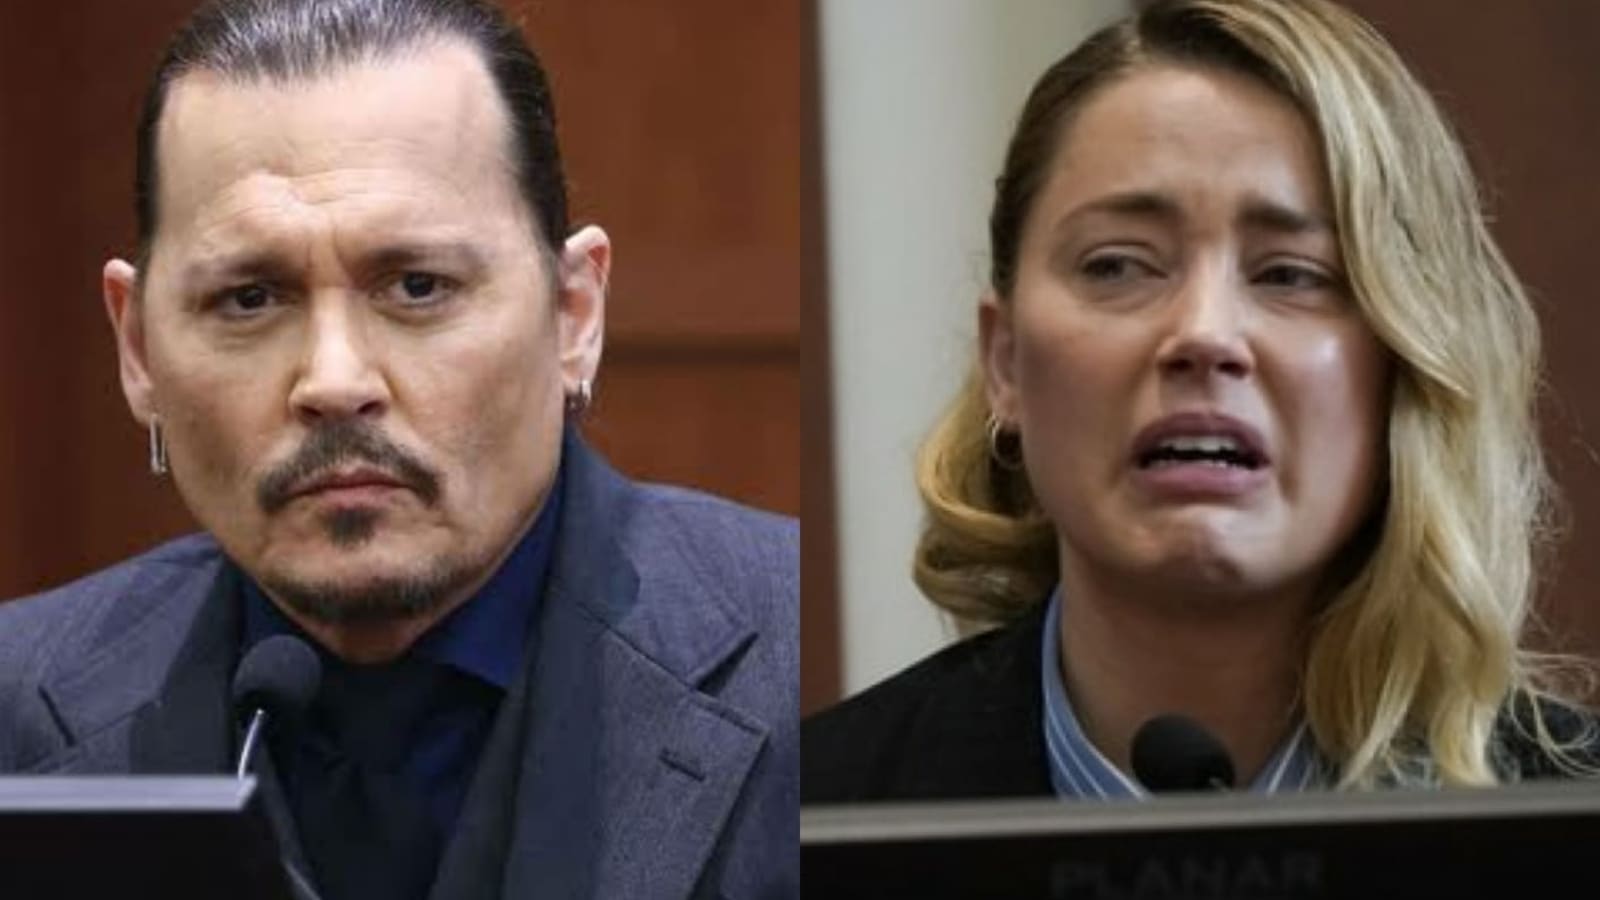 Johnny Depp calls Amber Heard’s teary-eyed testimony a ‘performance’, she says he lacks the ‘courage to look at her’